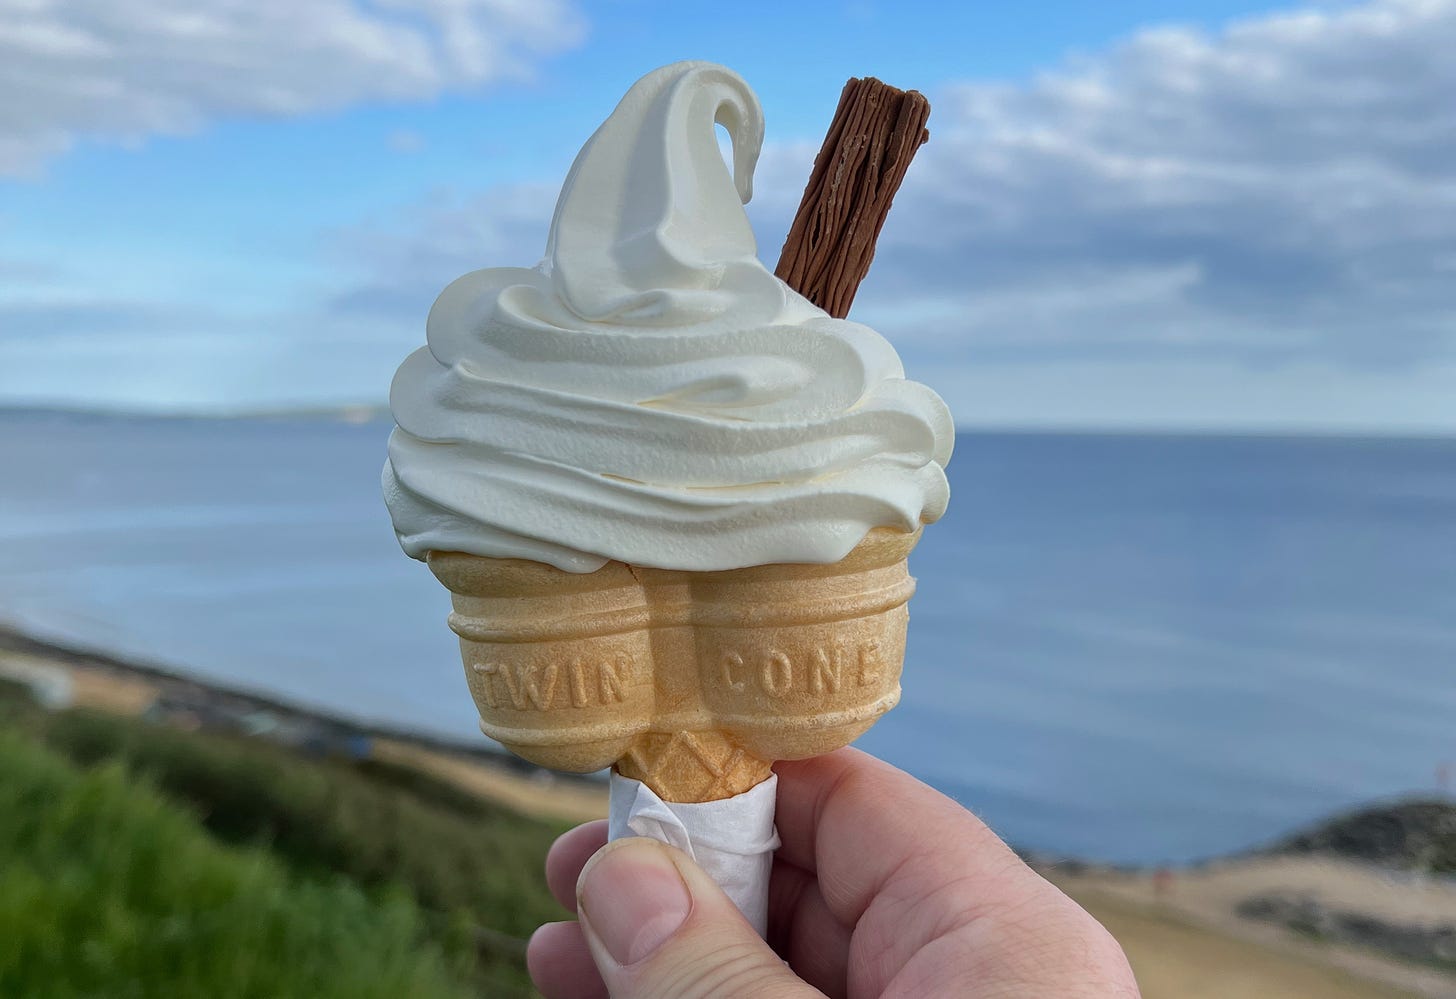 A double cone ice cream at the seaside — has summer finally arrived?